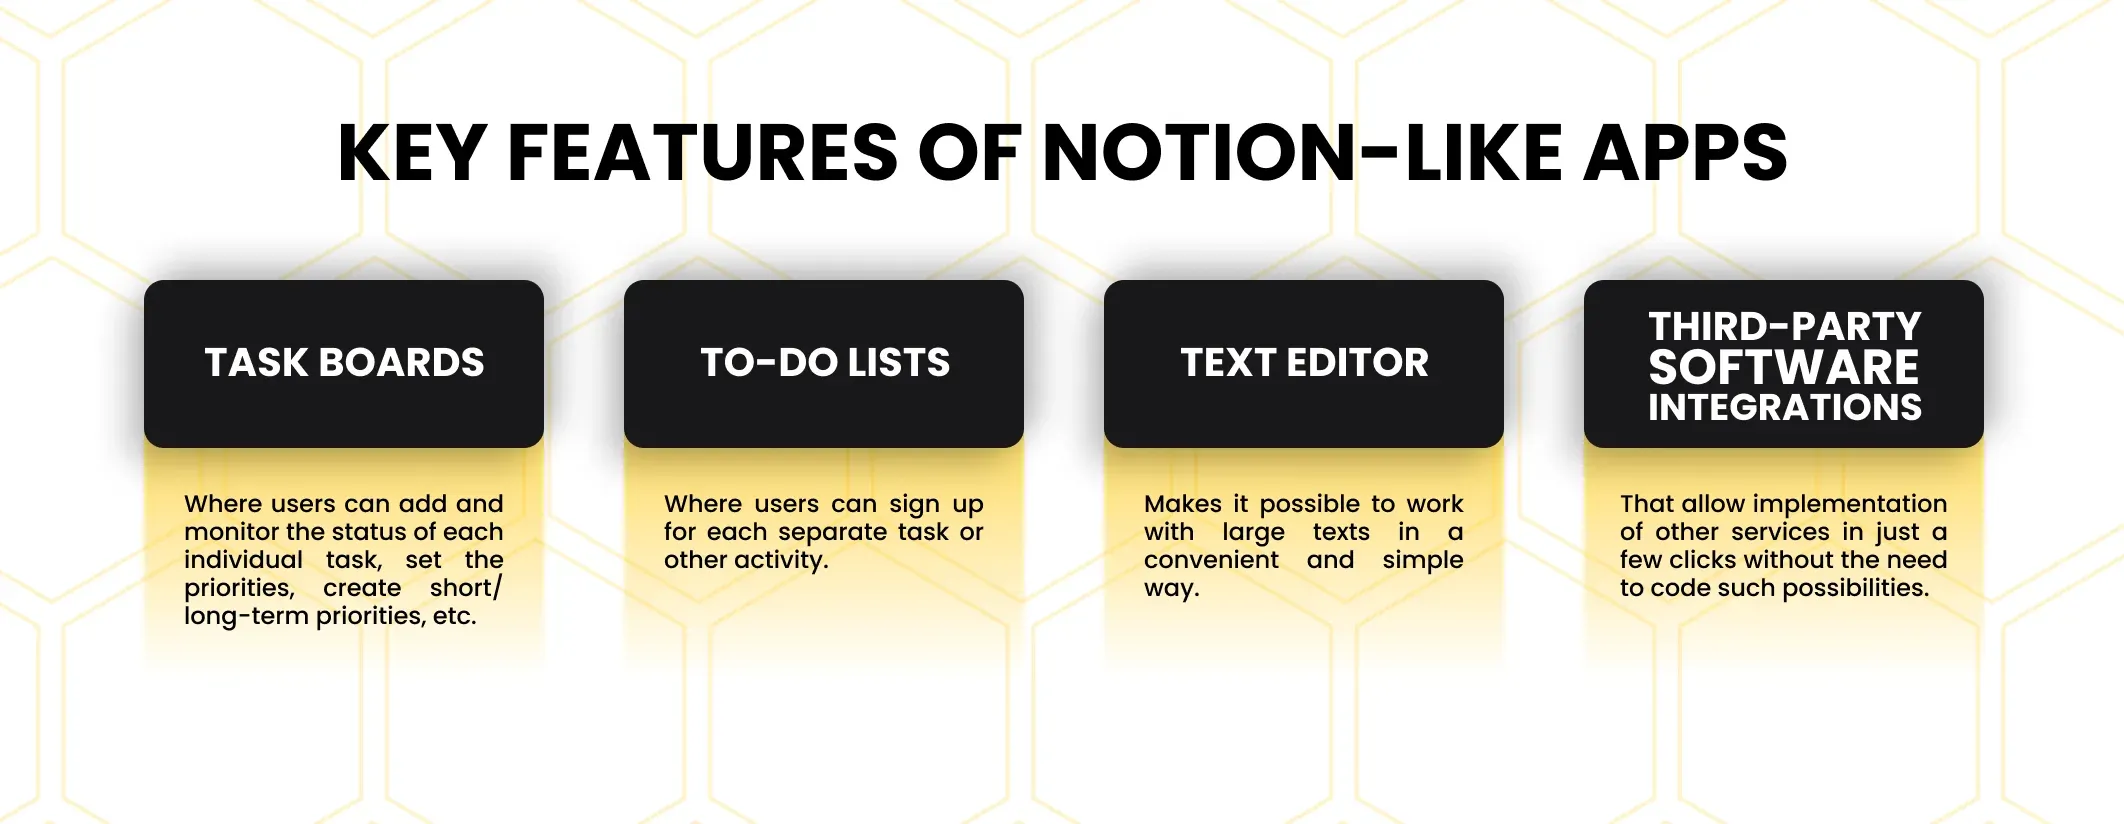 notion-like apps top features